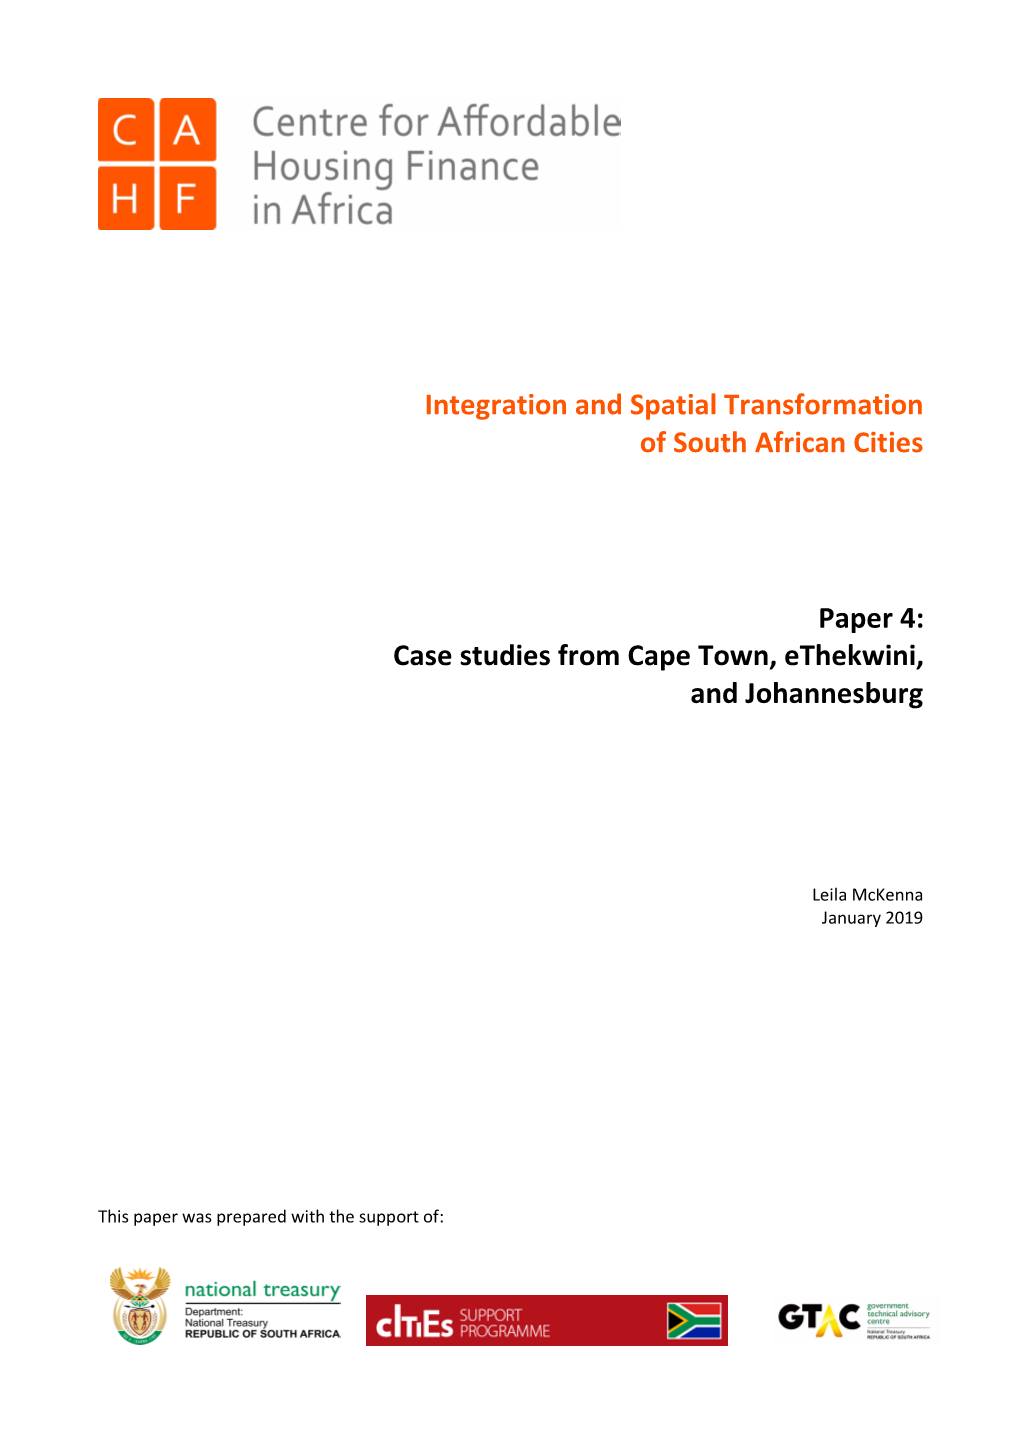 KR Integration and Spatial Transformation of South African Cities Paper 4